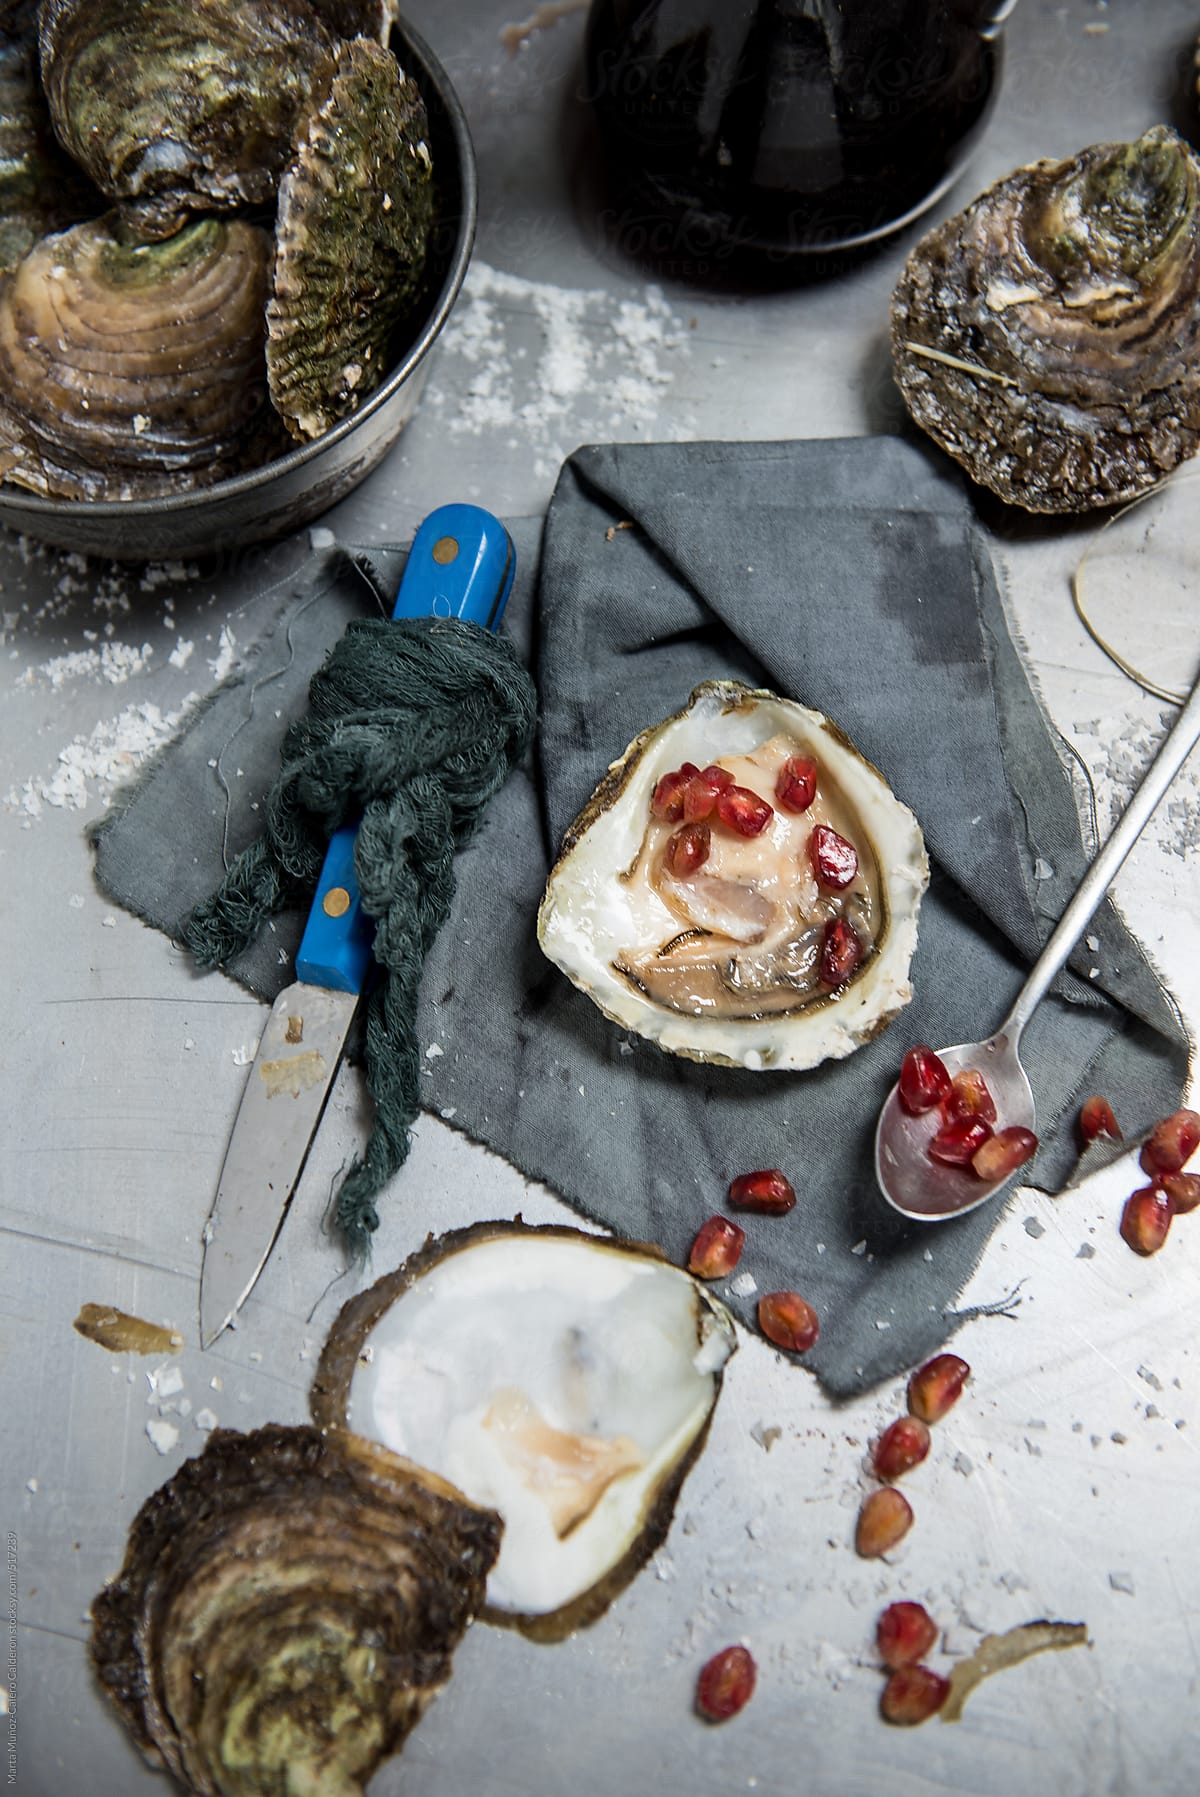 Oysters on metallic background with pomegranate and oyster knife opener